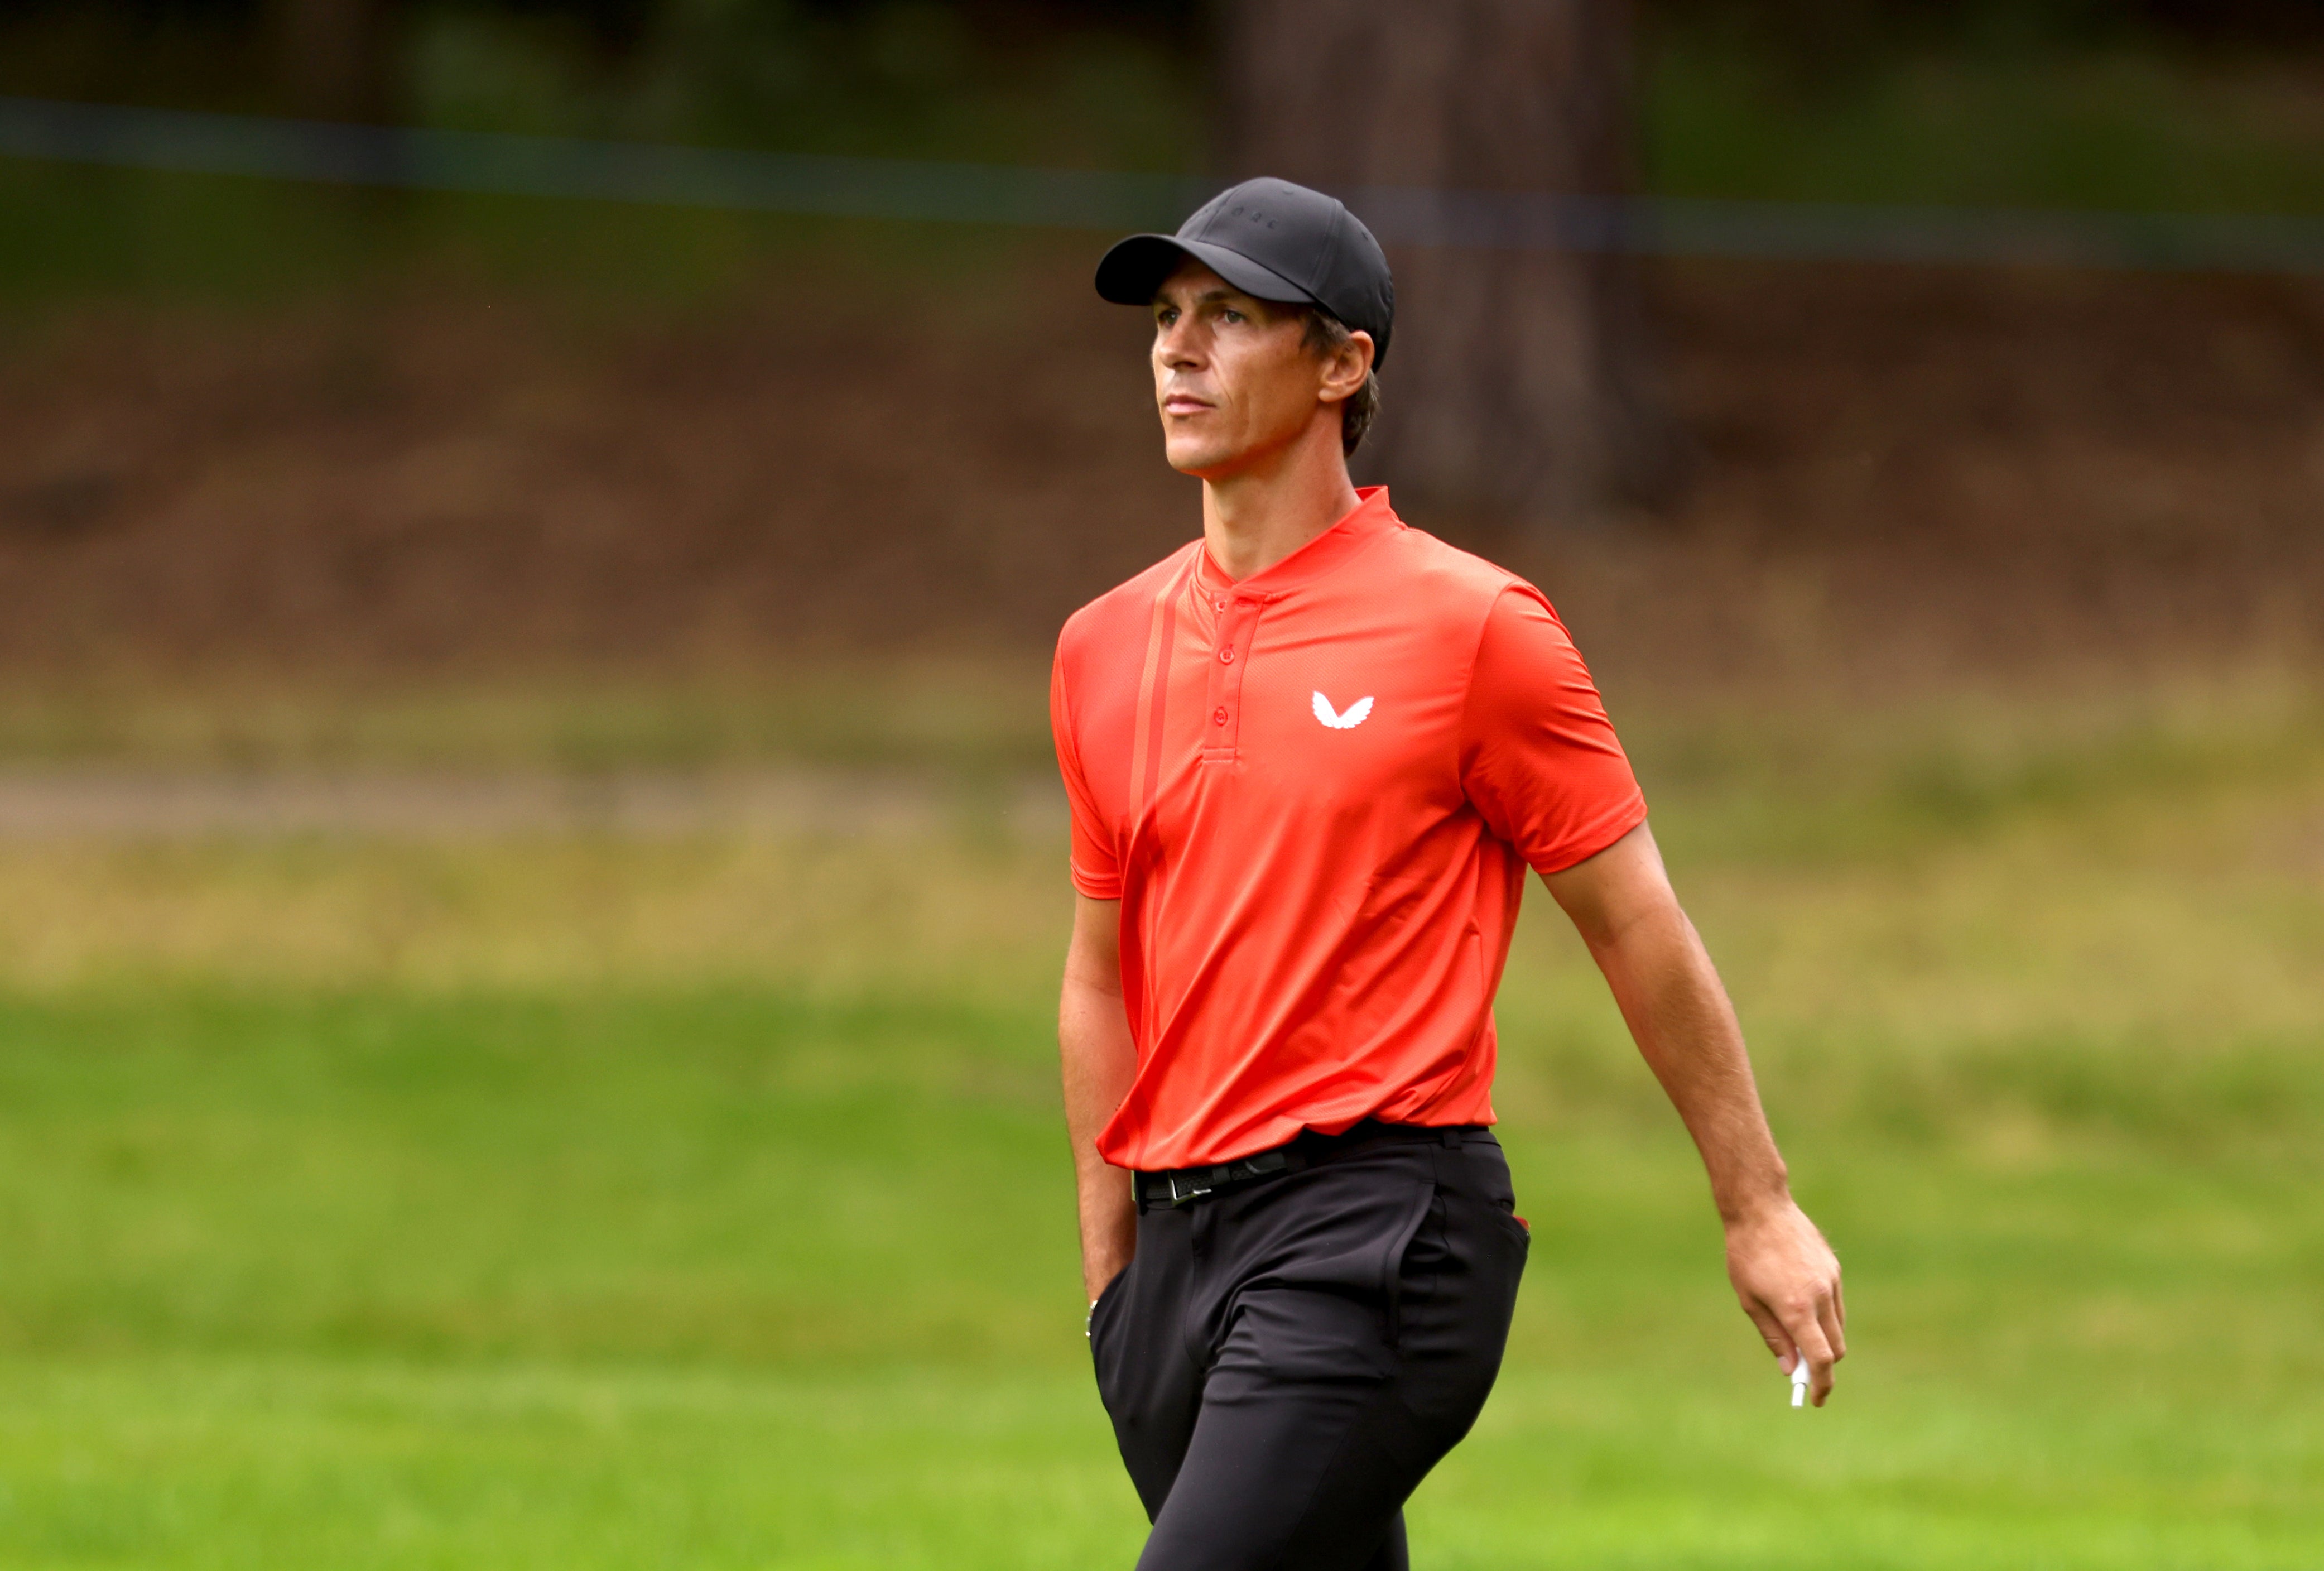 Thorbjorn Olesen on the 12th during day one of the BMW PGA Championship at Wentworth Golf Club